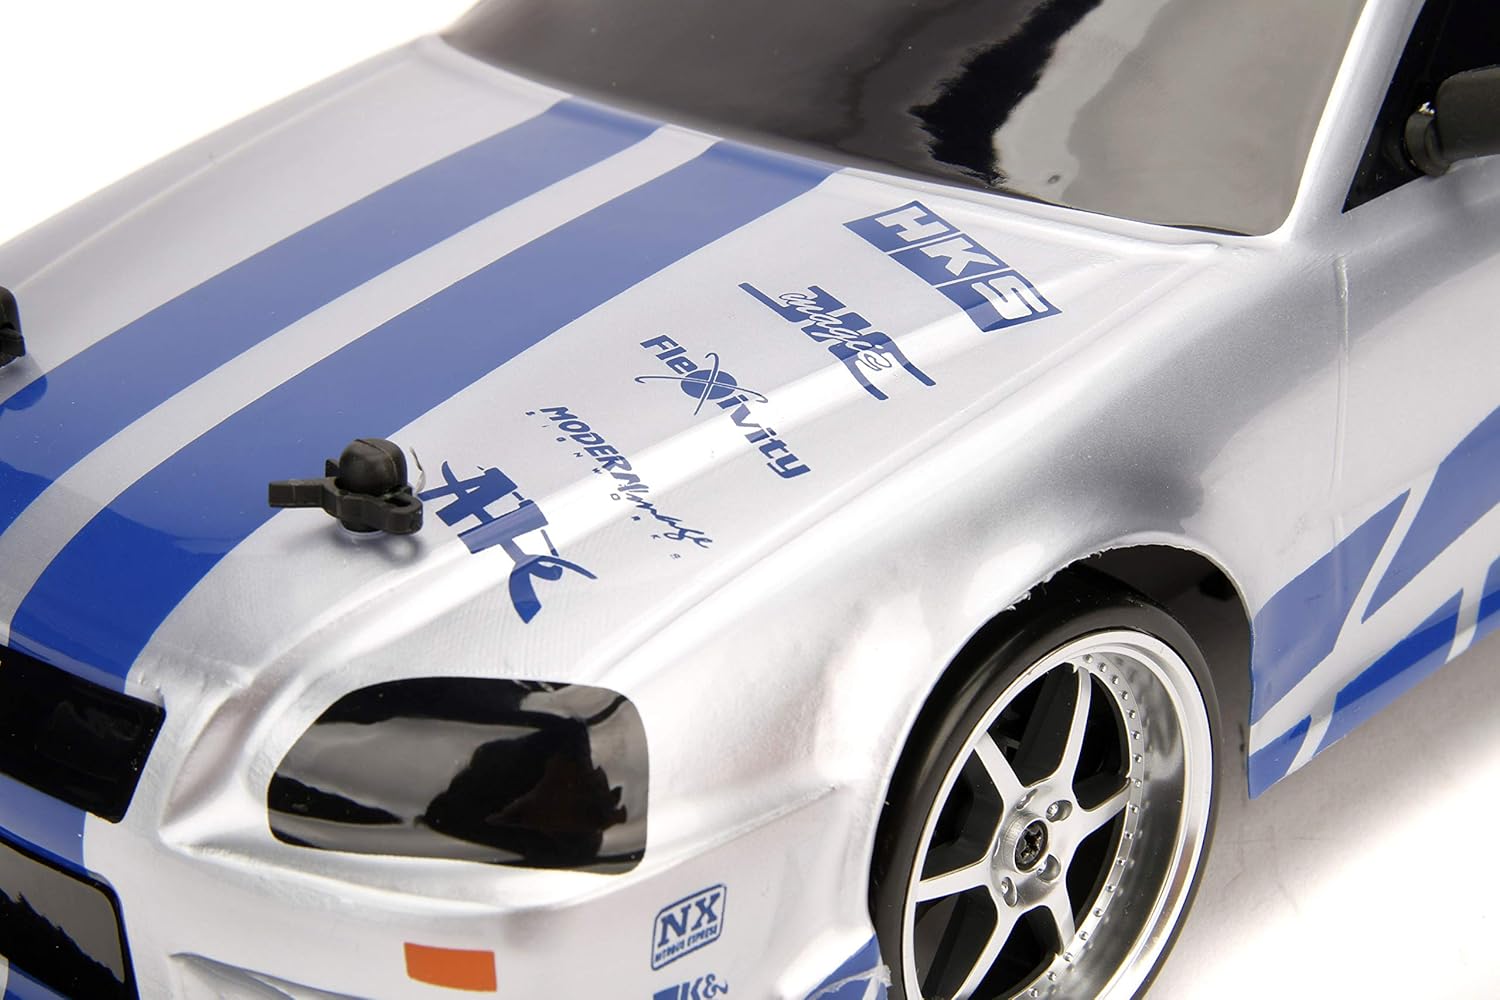 Jada Toys Fast & Furious Brian’s Nissan Skyline GT-R (BN34) Drift Power Slide RC Radio Remote Control Toy Race Car with Extra Tires, 1:10 Scale, Silver/Blue (99701) Review